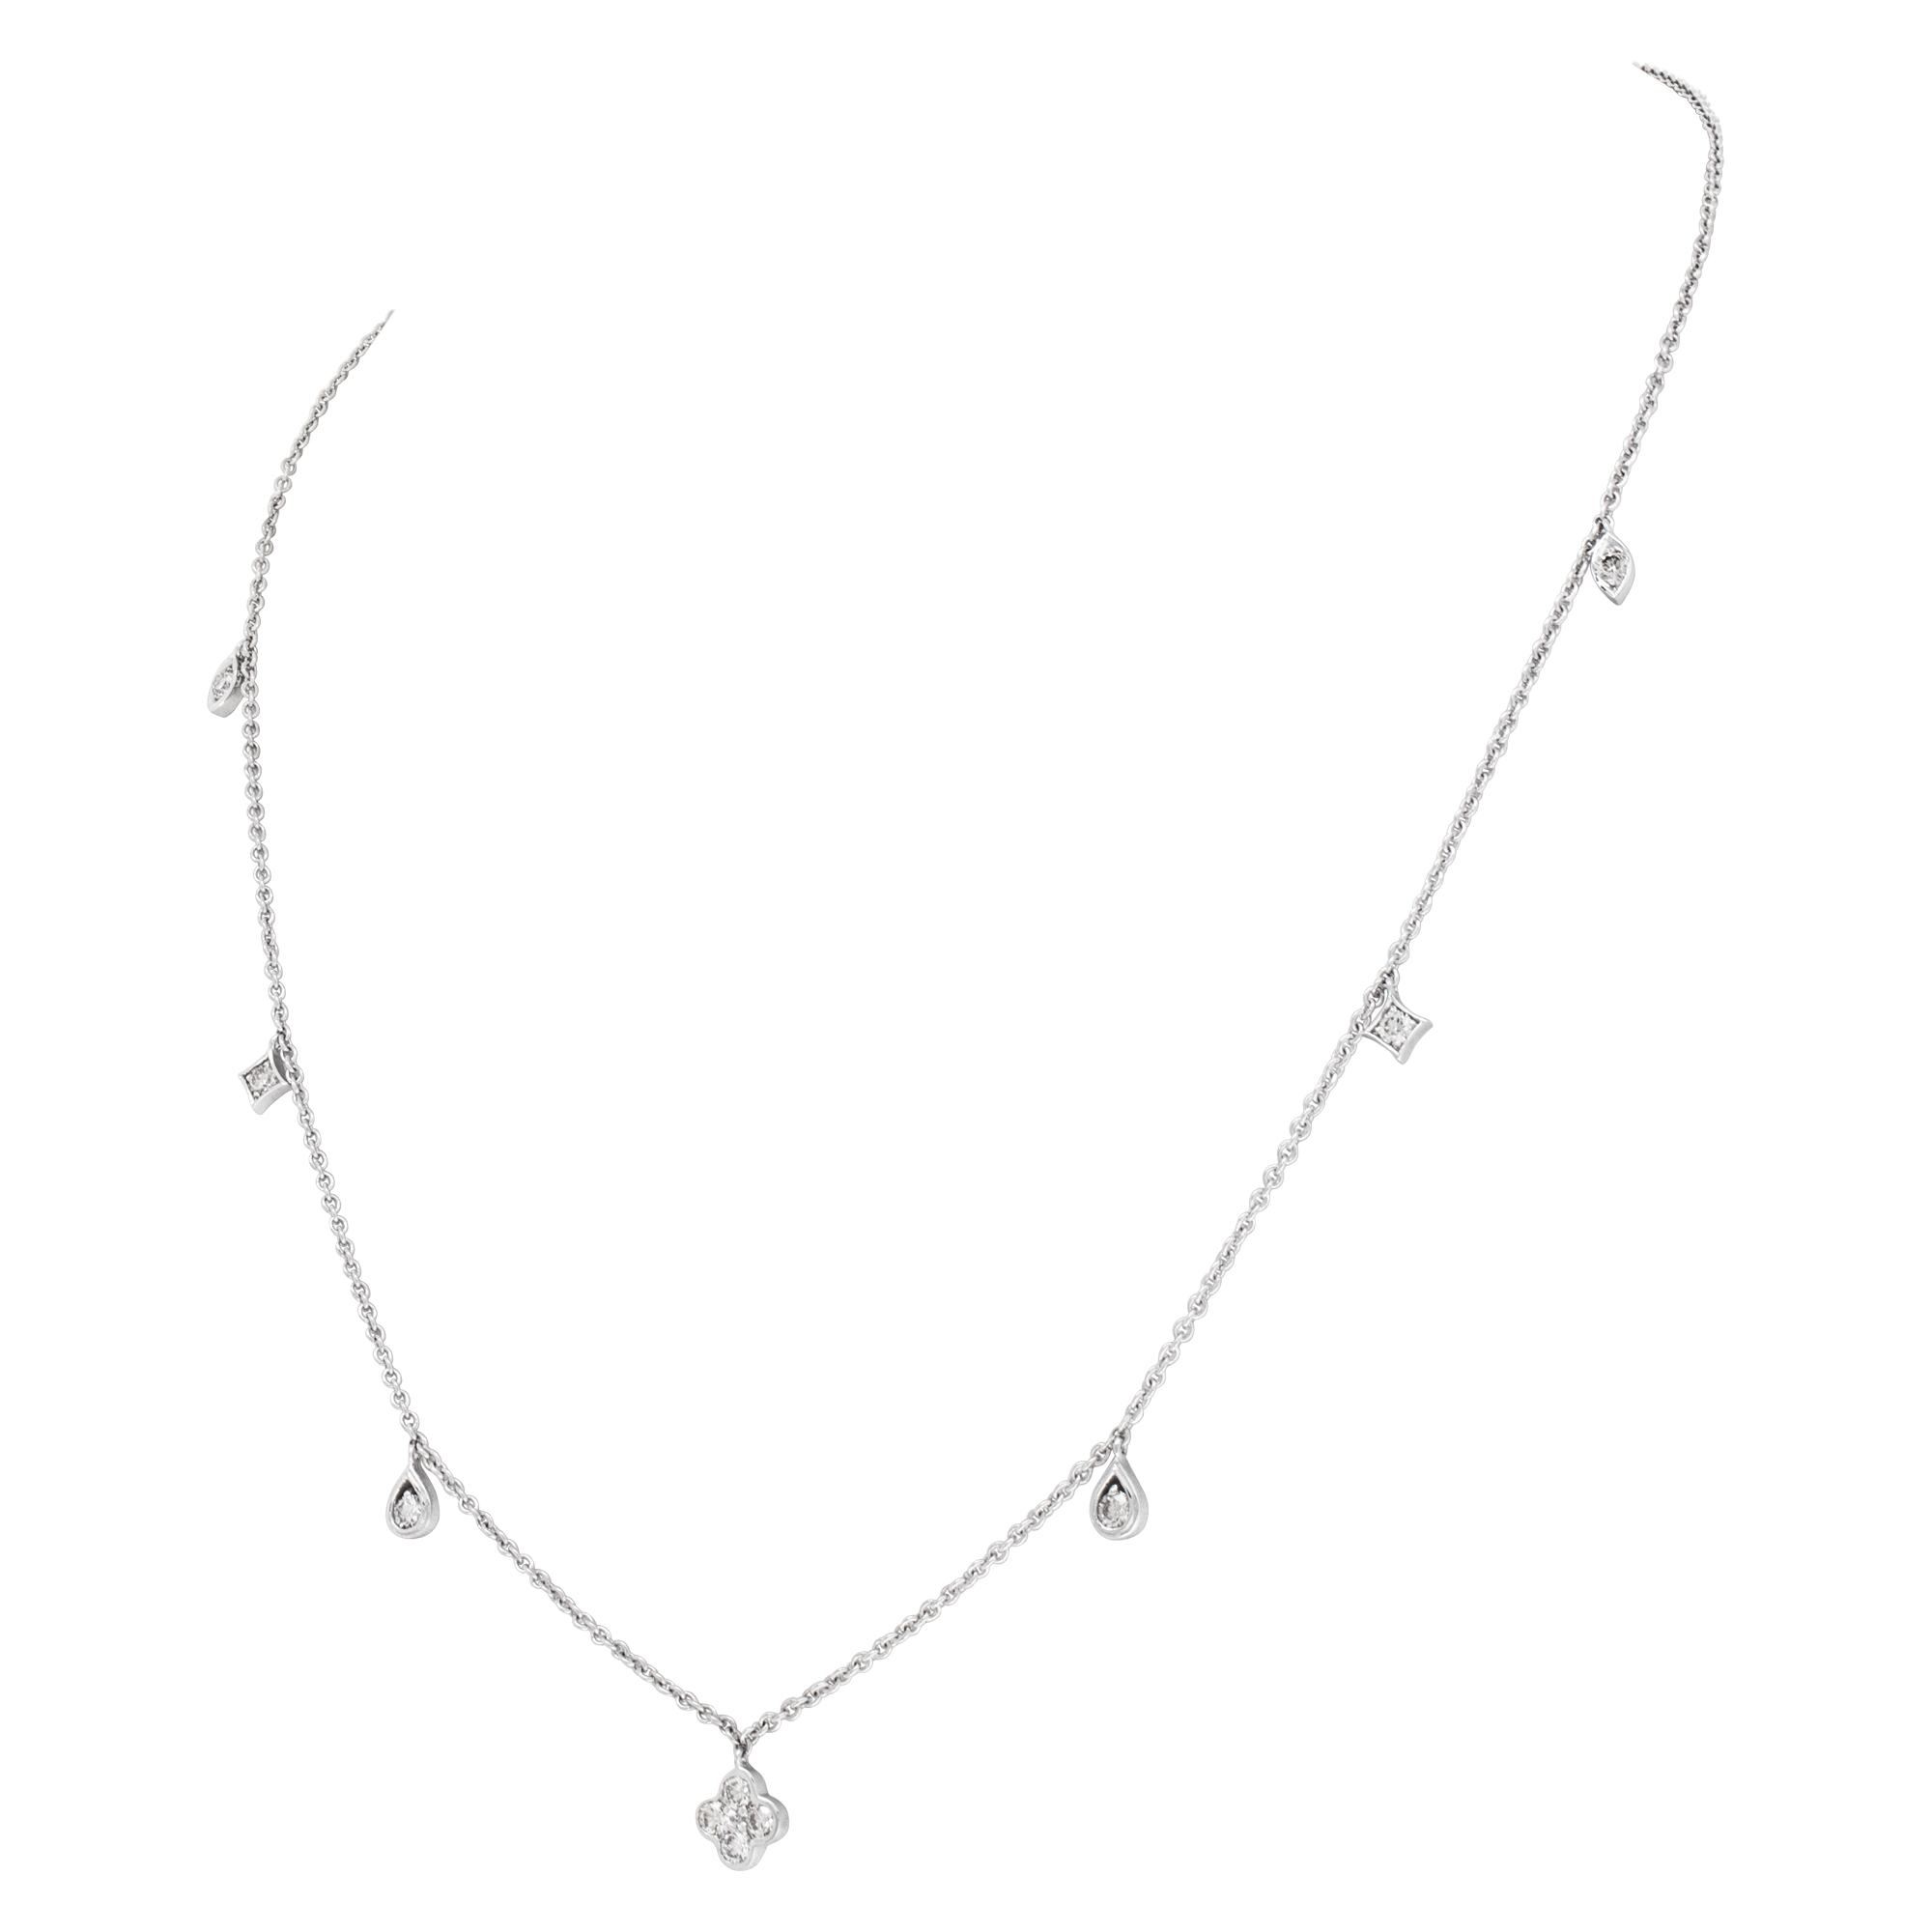 "Diamonds by the Yard" 18 inches chain with approx 1 carat total weight bezeled set, full cut round brilliant diamonds set in 18k white gold. Diamonds estimate: I/J color, SI clarity. Length 18 inches image 5